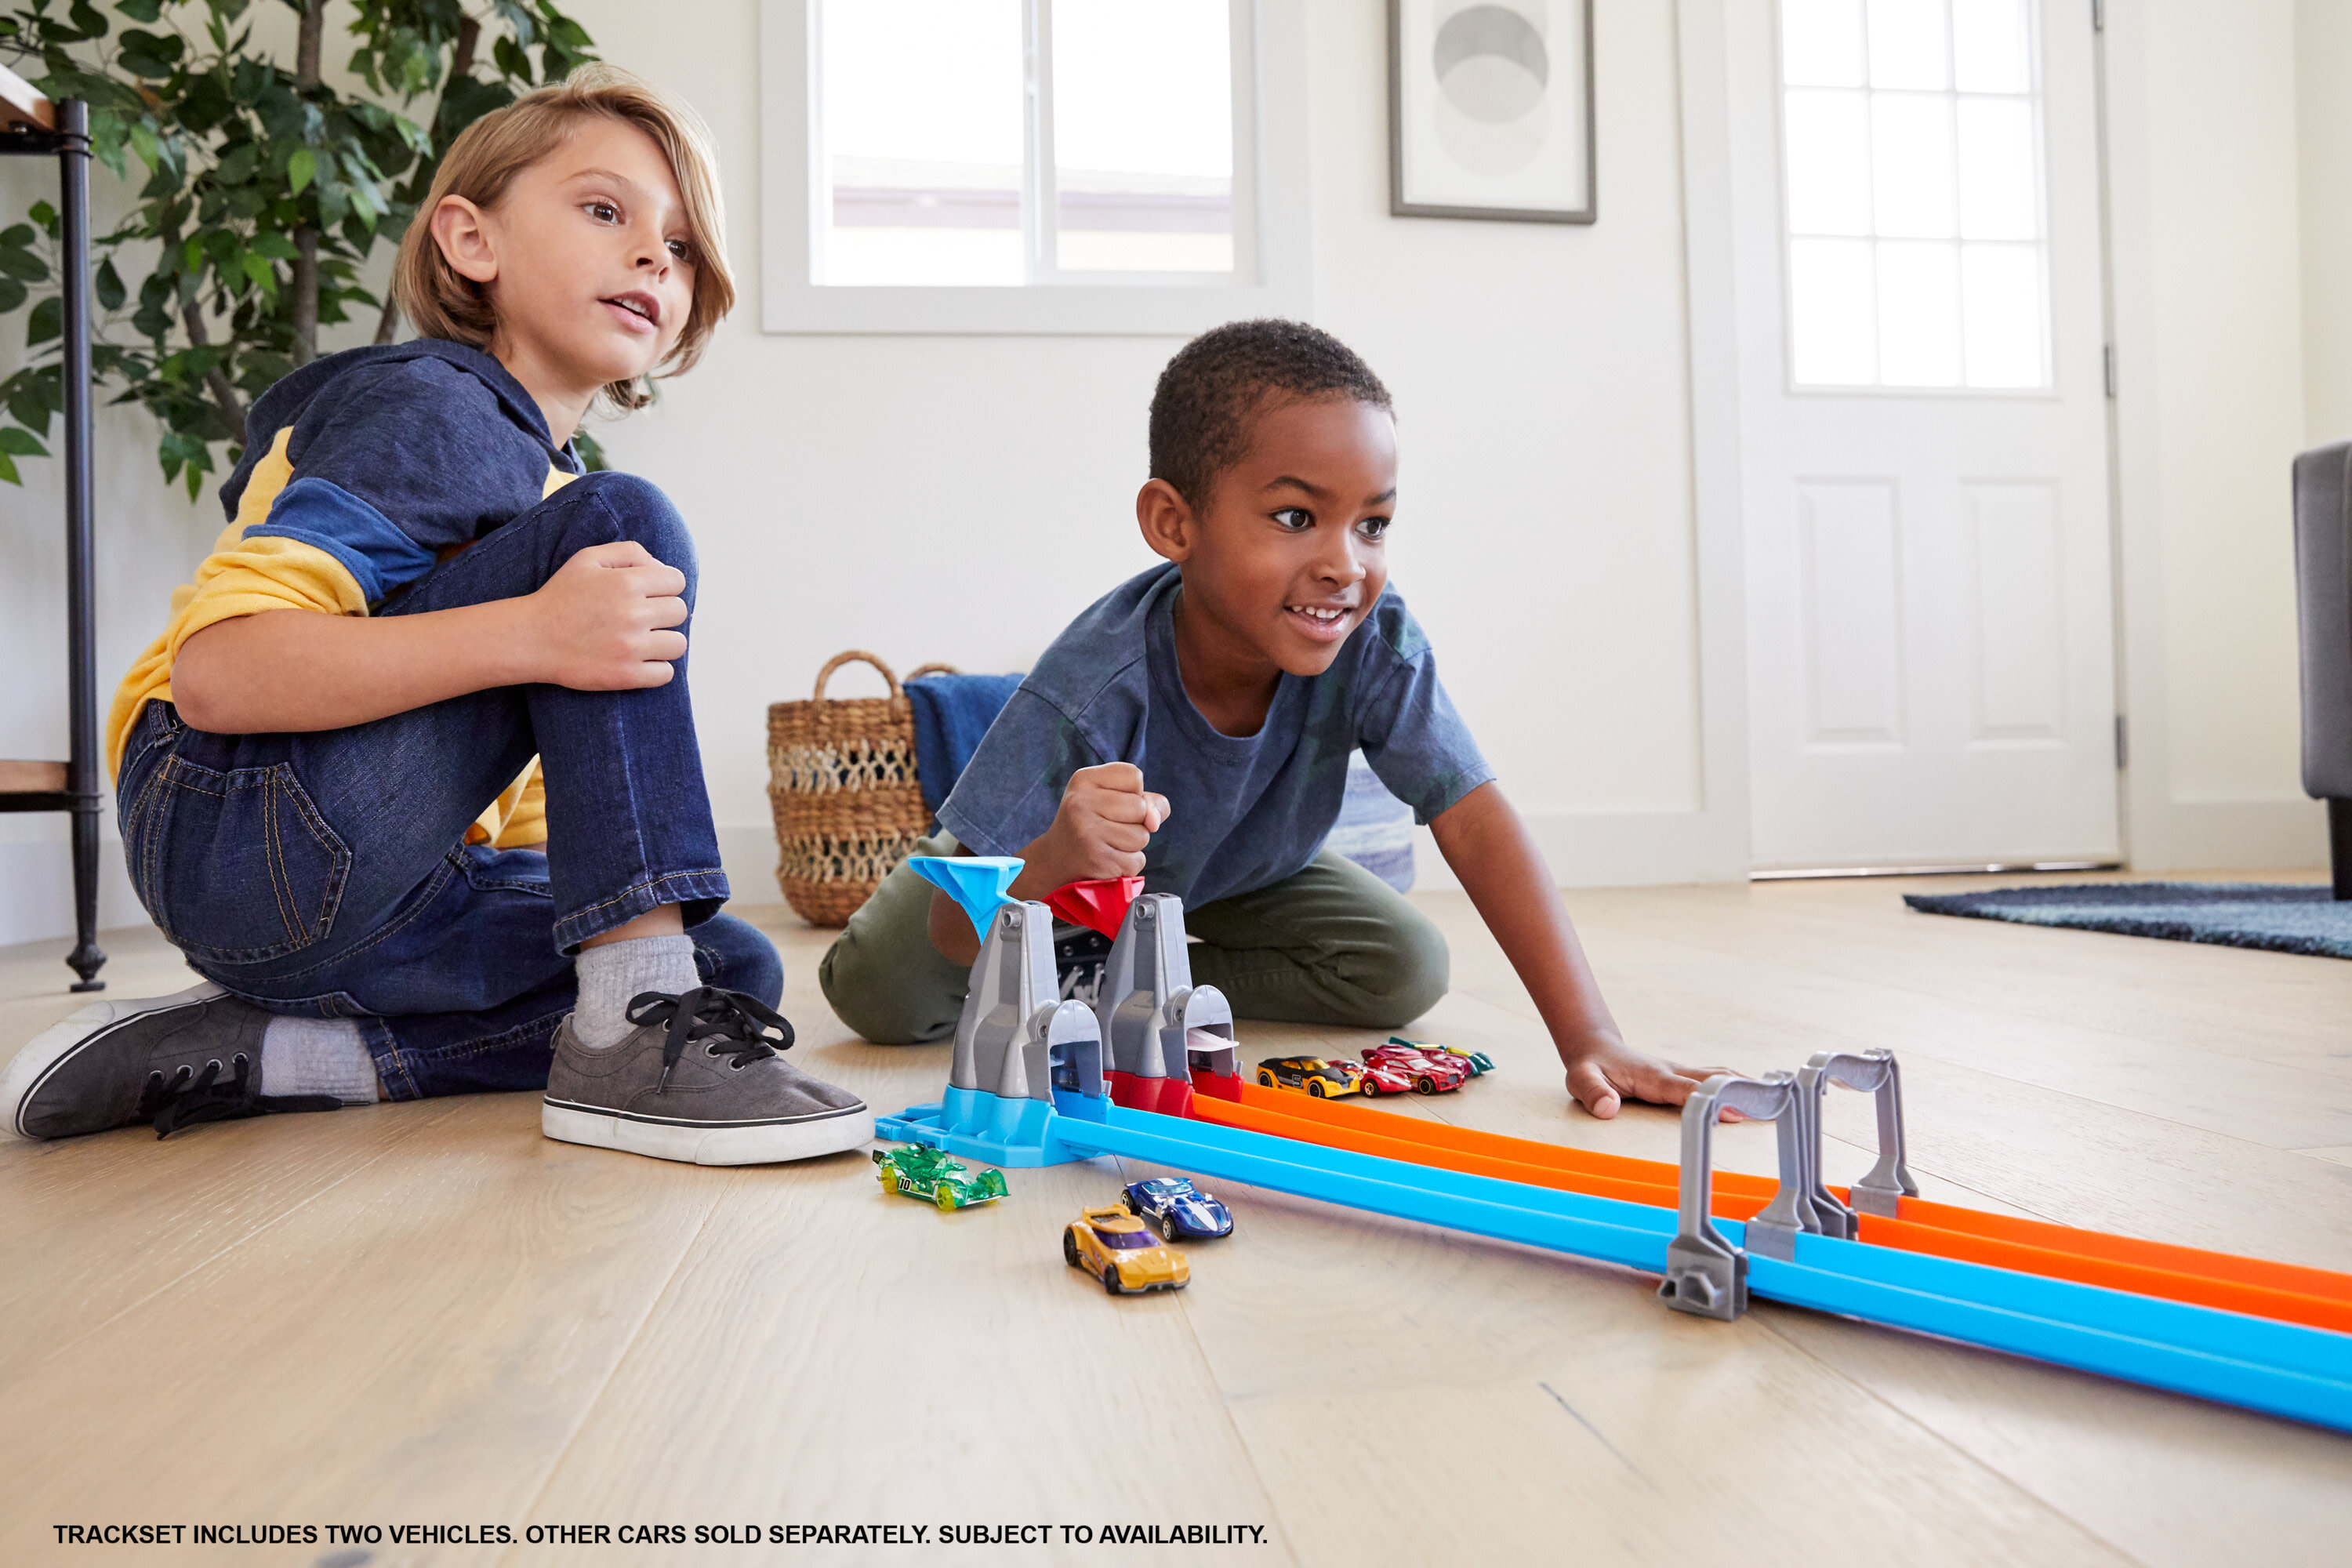 Hot Wheels Double Loop Dash Track Set with 2 Toy Cars in 1:64 Scale, 12-ft Long, Ages 5 and up - image 3 of 7